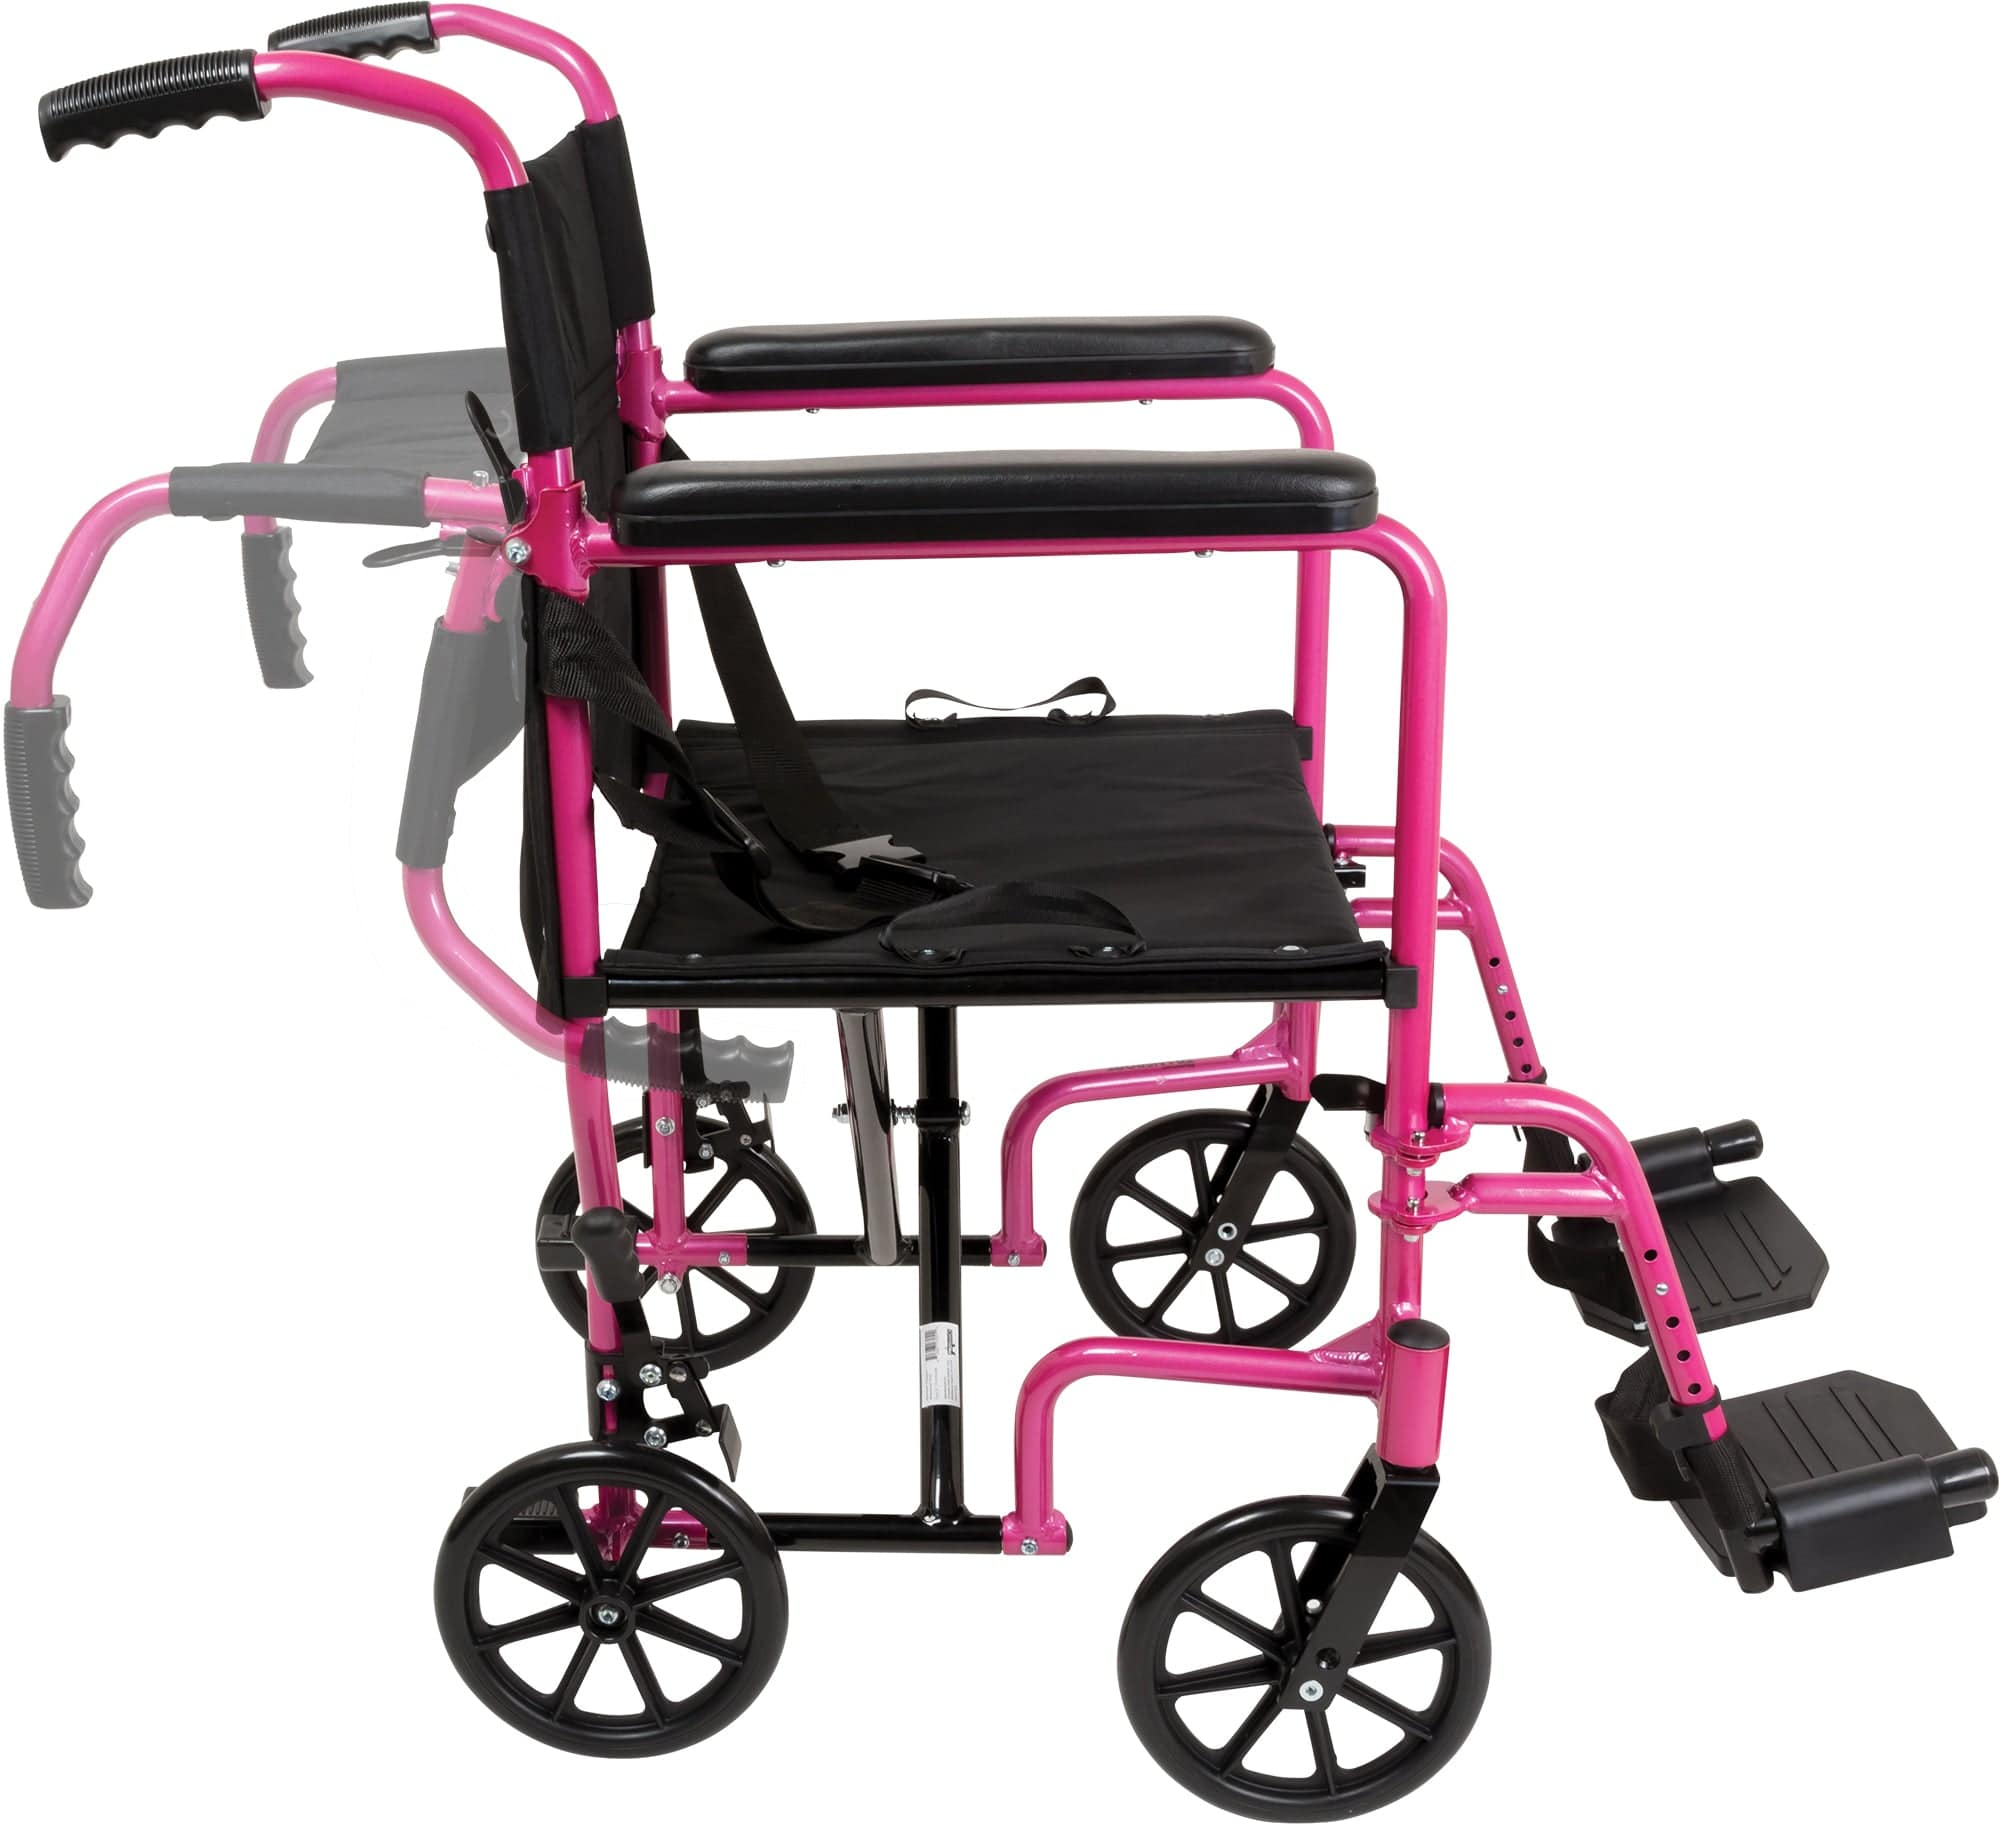 Compass Health Transport Wheelchairs Compass Health ProBasics Aluminum Transport Wheelchair, 19-inch, Pink